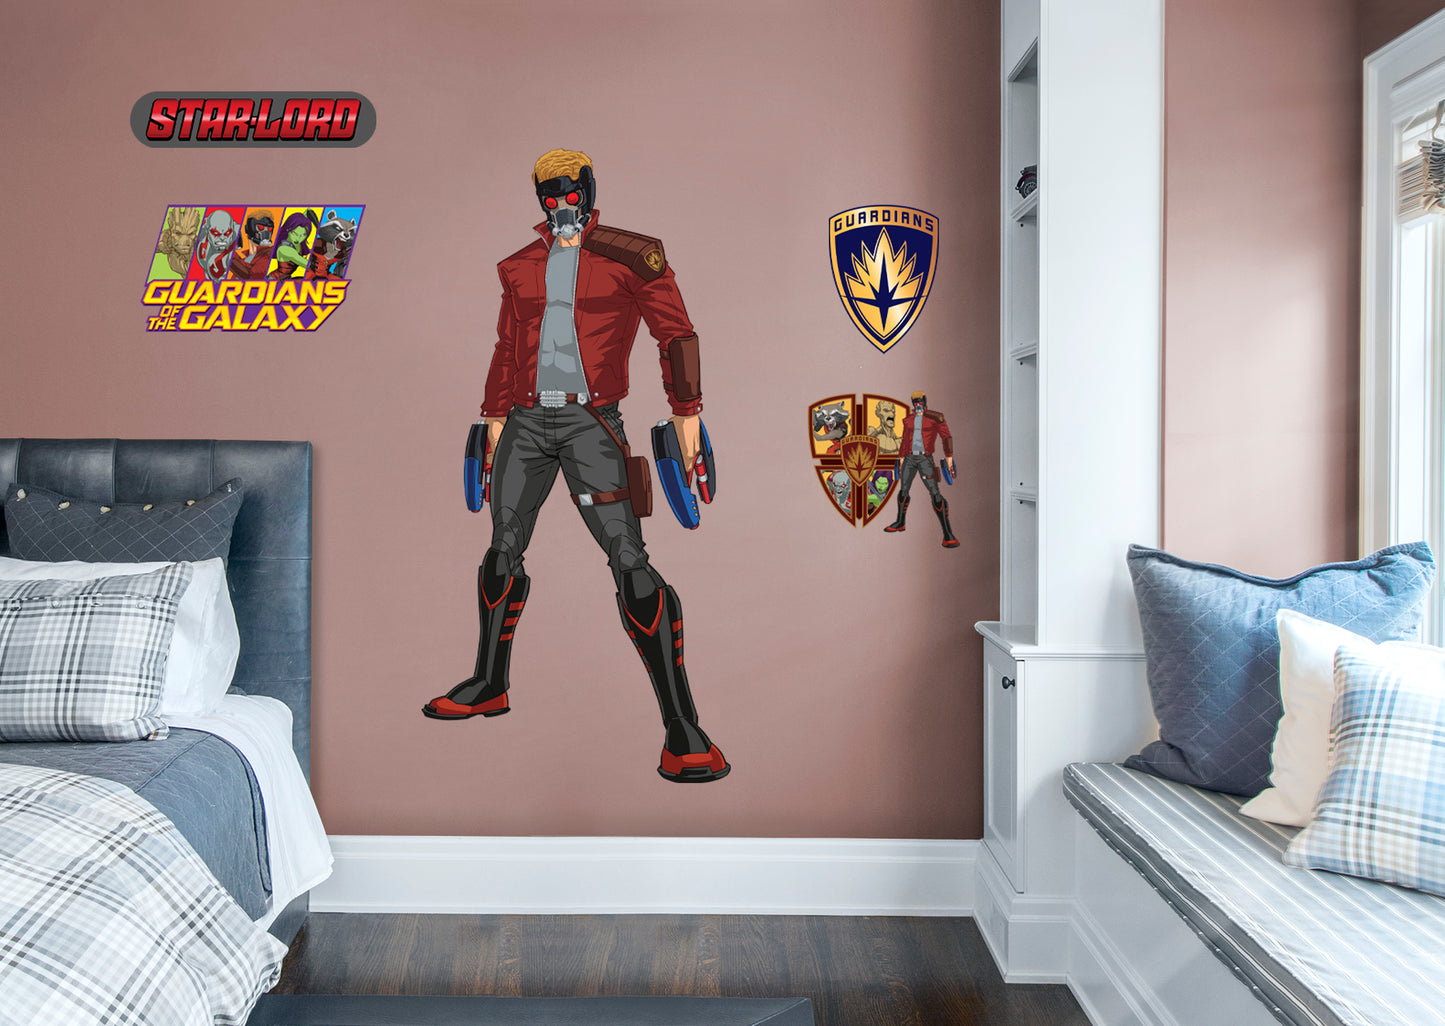 Guardians of the Galaxy Star-Lord RealBig        - Officially Licensed Marvel Removable Wall   Adhesive Decal